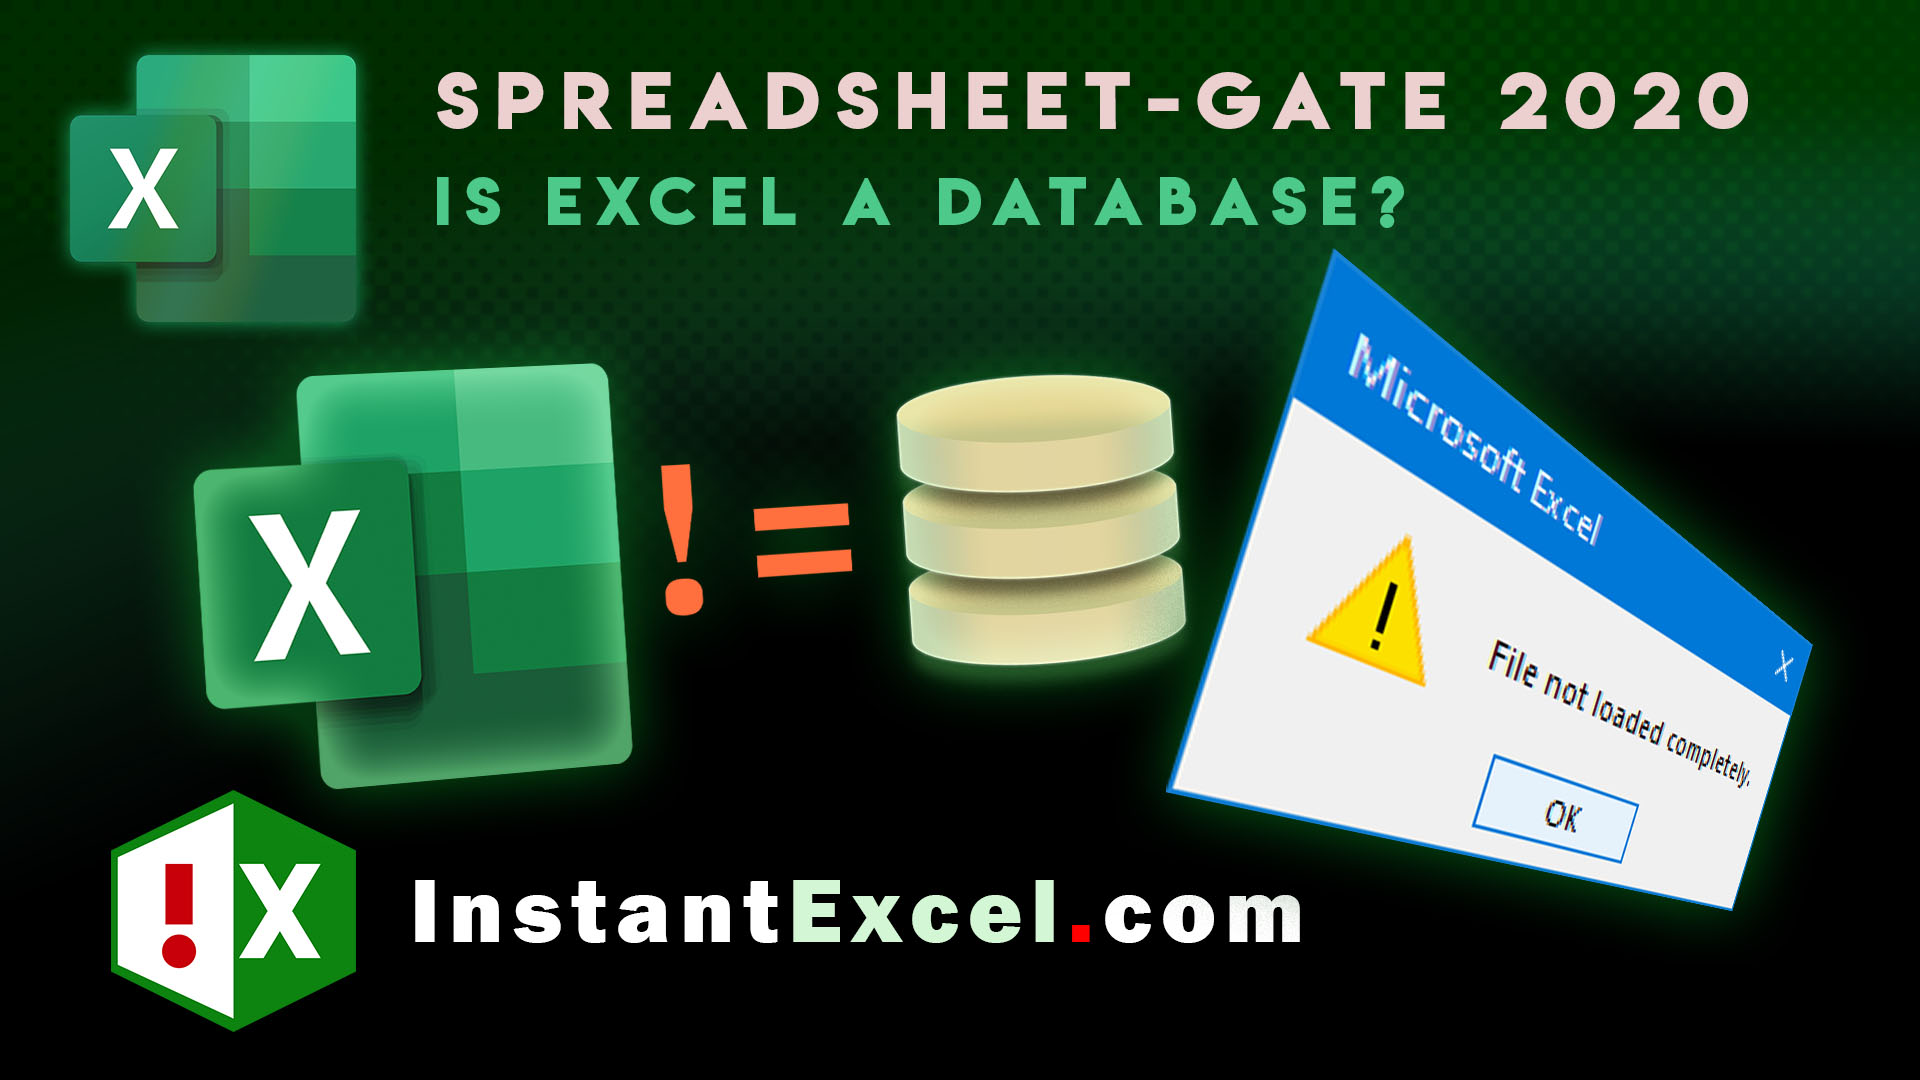 Video: Why Excel isn't a database